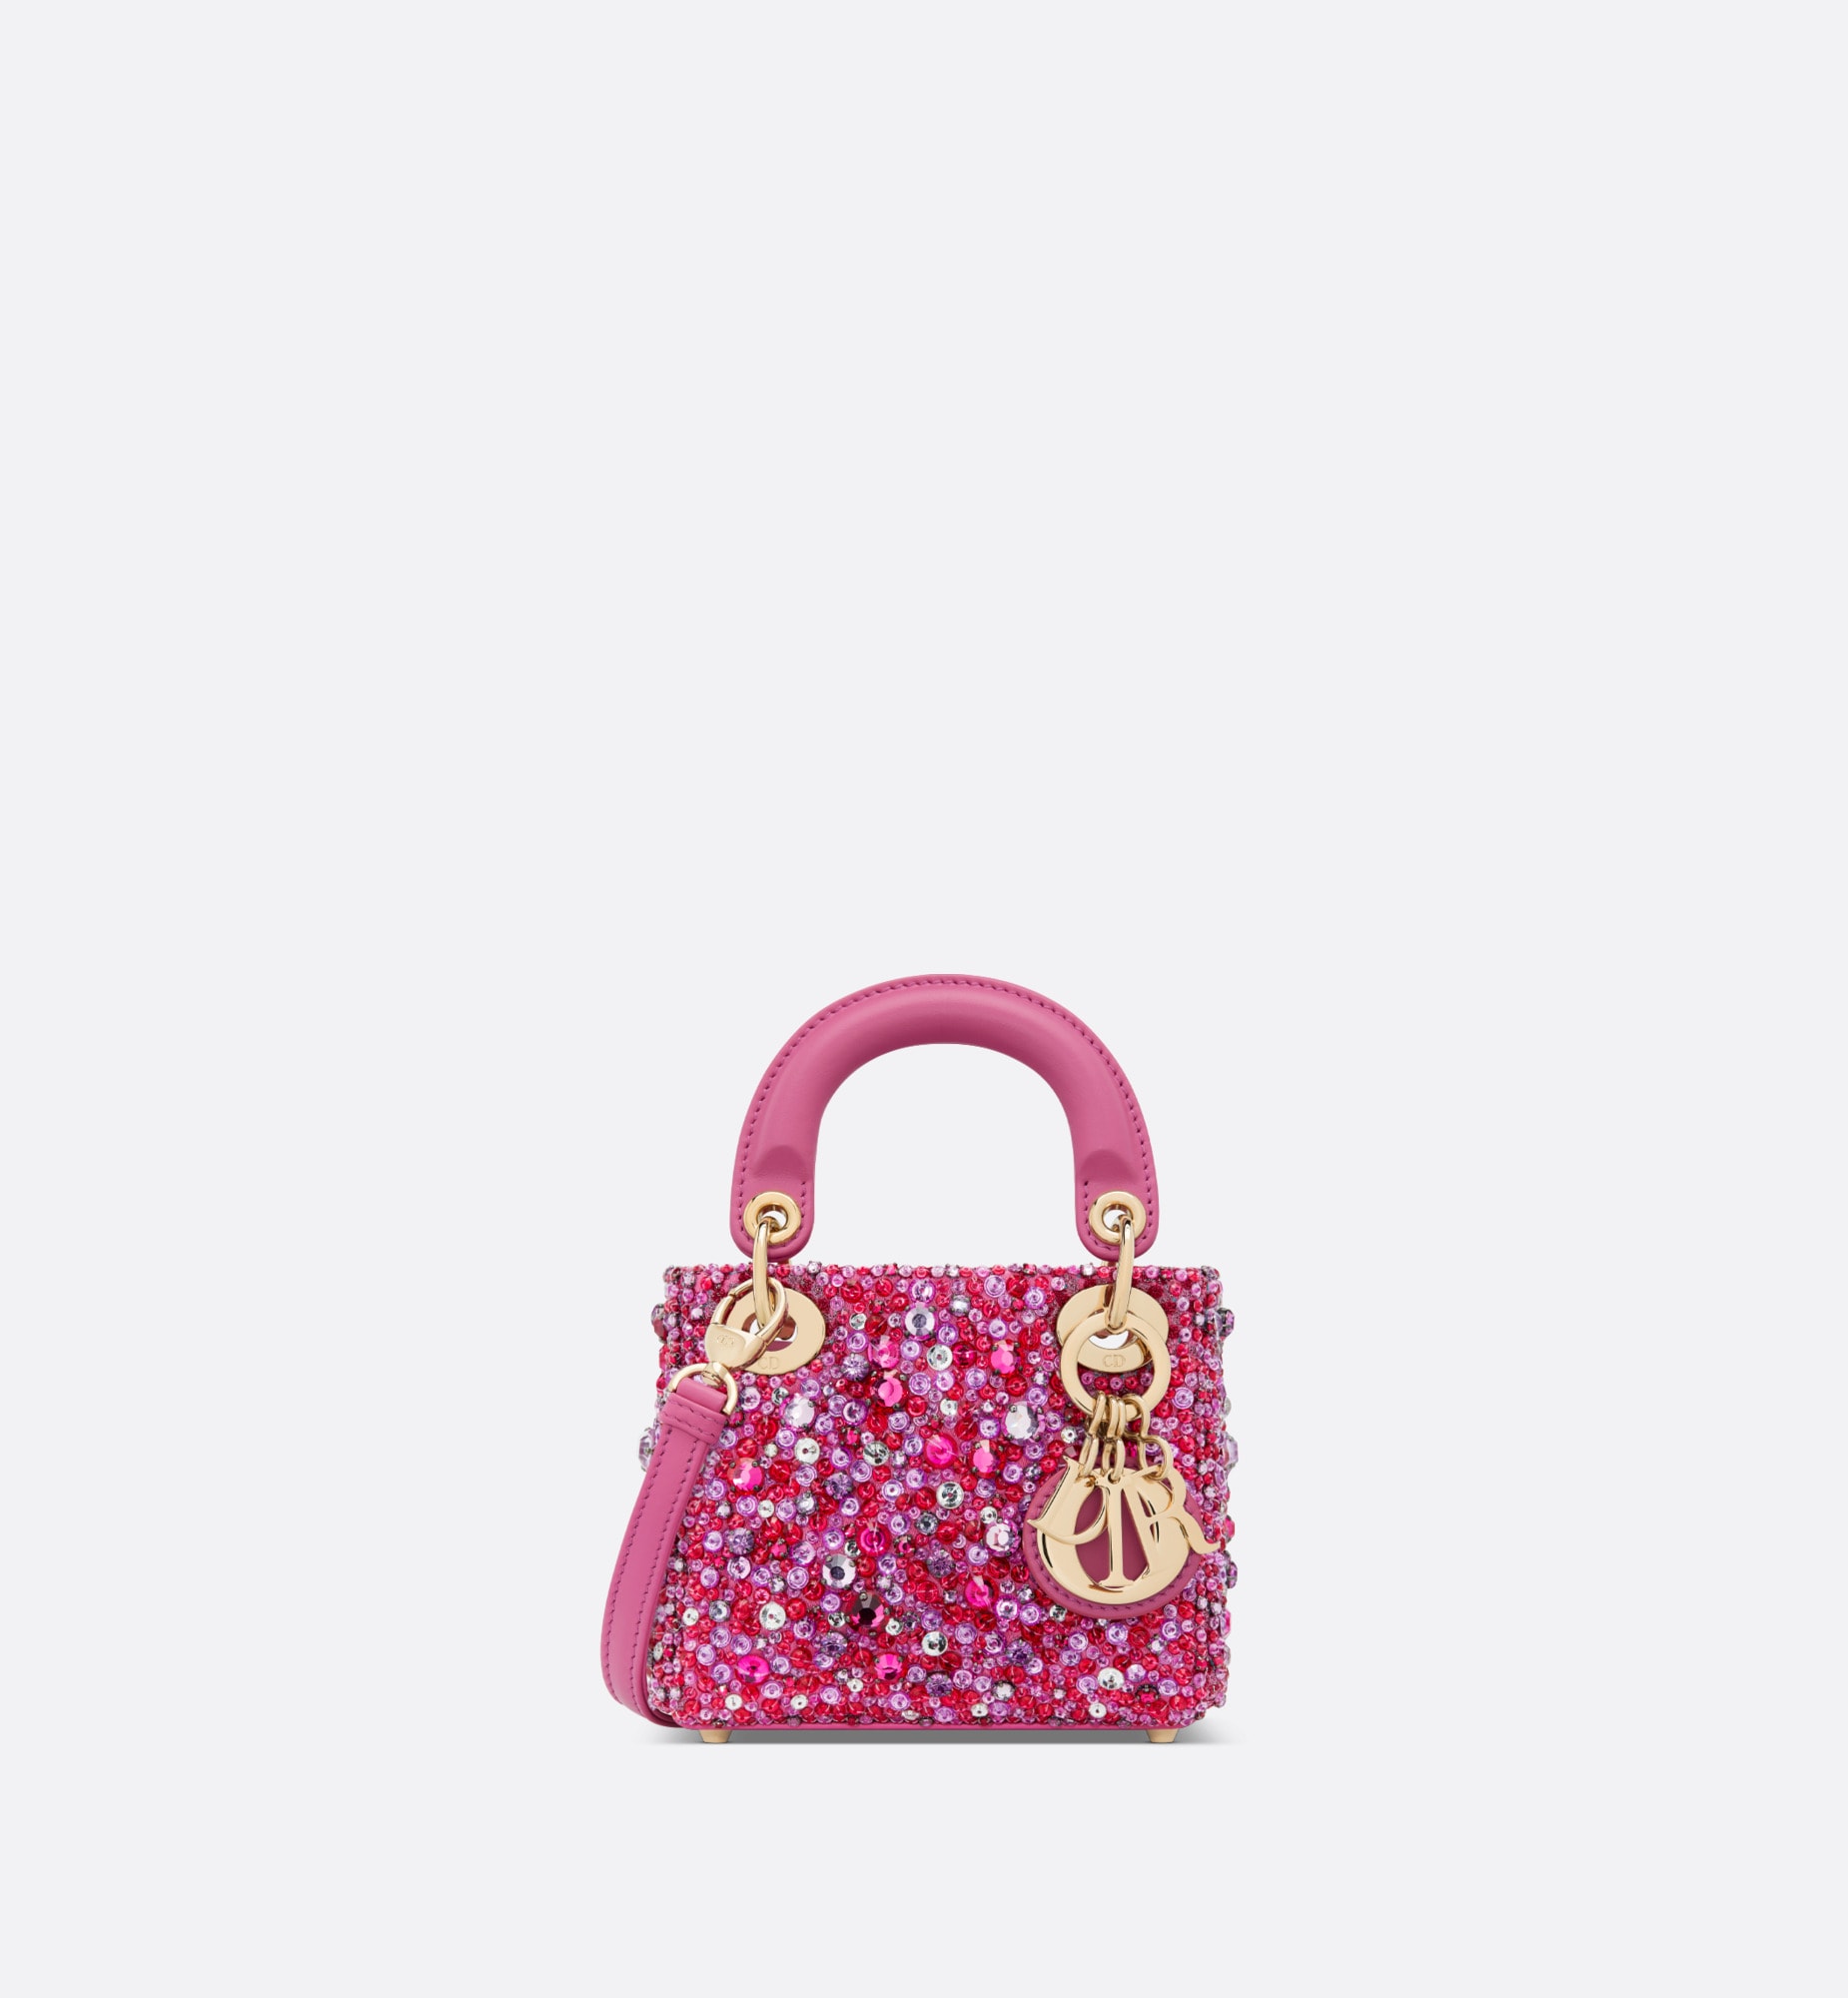 Lady dior micro bag pink strass-embroidered satin